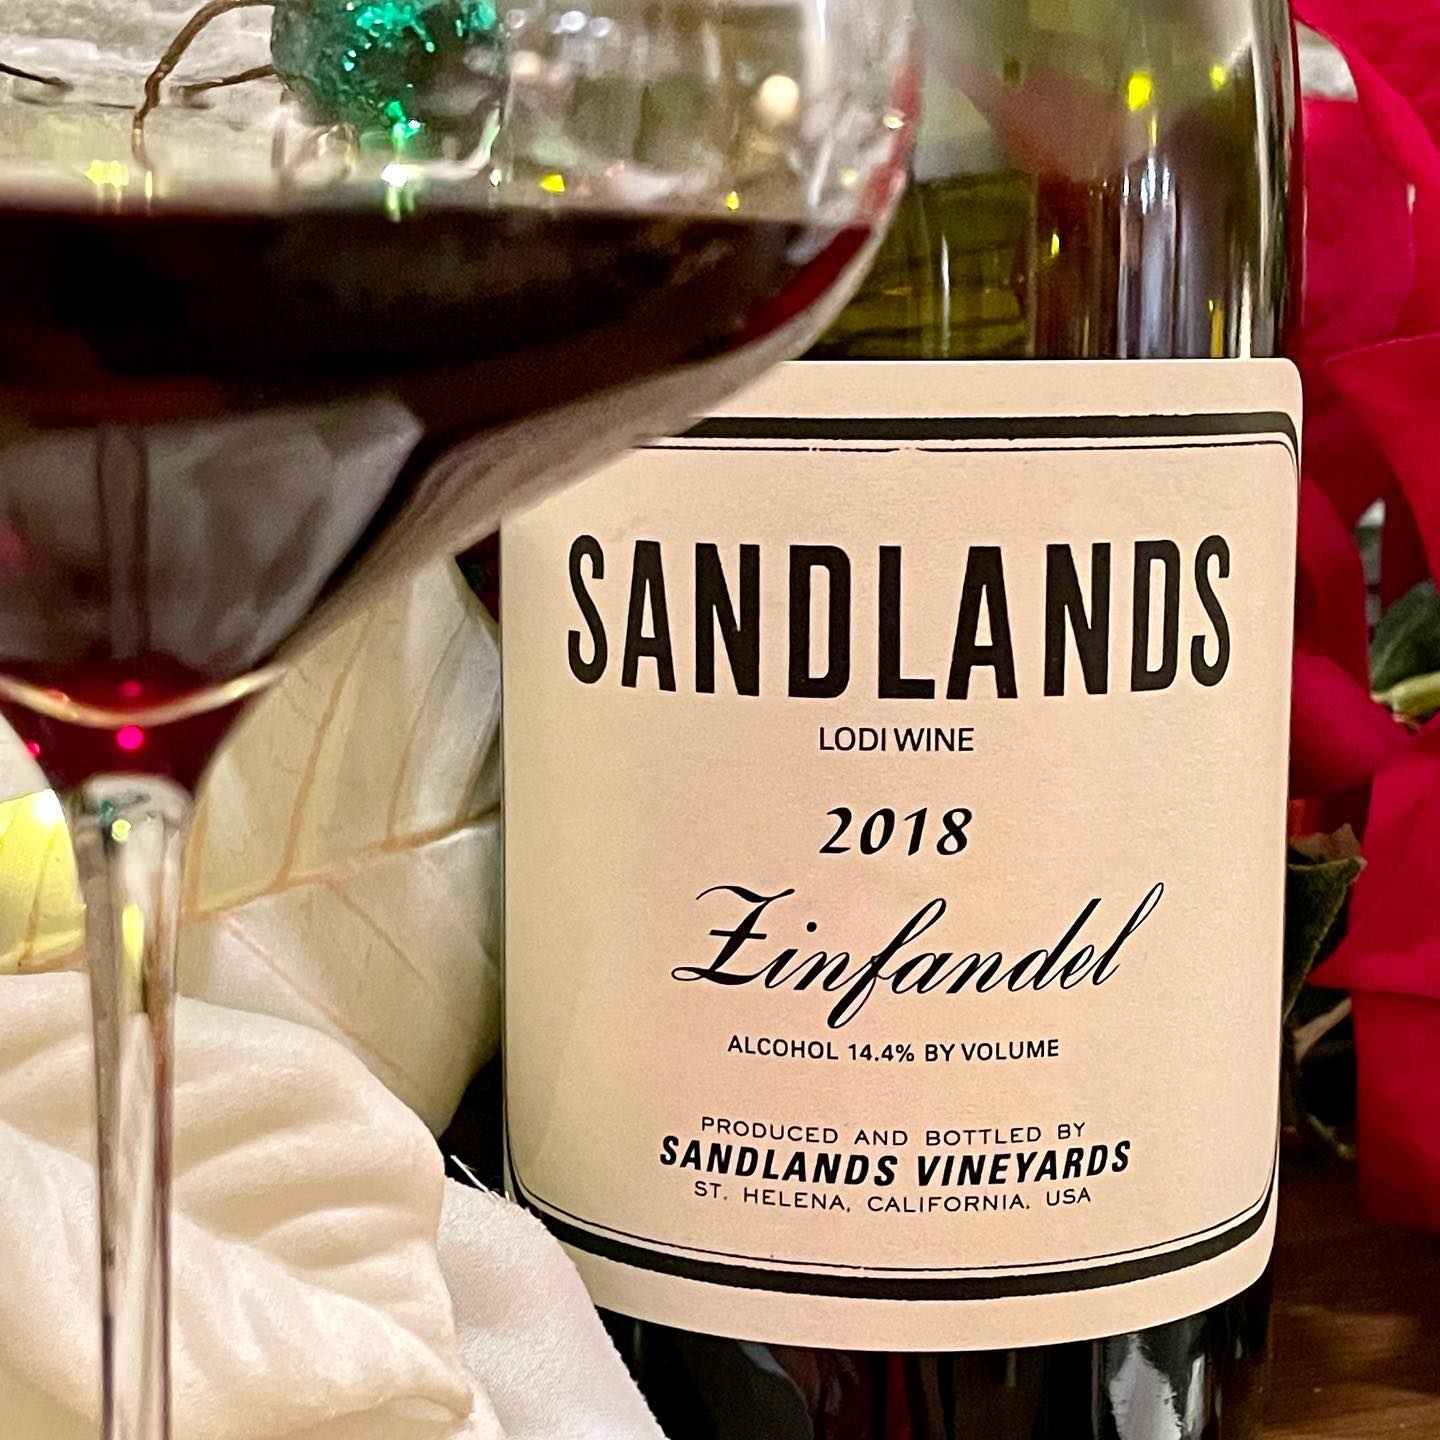 Zinfandel can be a hard sell in our house. We are not fans of big, over-ripe Zinfandel with high alcohol. We are happy to leave that style of Zin for the many people who love it. Happily, this is not one of those Zinfandels. Love the boysenberry, earthy flavors with firm but fine tannins and a hint of baking spice. There is plenty of flavor and texture in a barely medium body. Perfect for a chilly evening. Sourced from Kirschenmann Vineyard, on Lodi’s east side near the Mokelumne River, planted in 1915 to Zinfandel with a bit of Carignan, Cinsault and Mondeuse Noire. It’s history in a glass. Hope you’re sipping something delicious. 
.
.
.
#zinfandel #zinfandelwine #lodizinfandel #kirschenmannvineyard #historicvineyard #localwine #drinklocal #drinkcalifornia #californiawine #californiaadventure #californiawinelover #californiazinfandel #winelover #winetime #instawine #wineoftheday #wineoclock #winepassion #foodandwine #winenotes #redwinelover #vinrouge #instawine